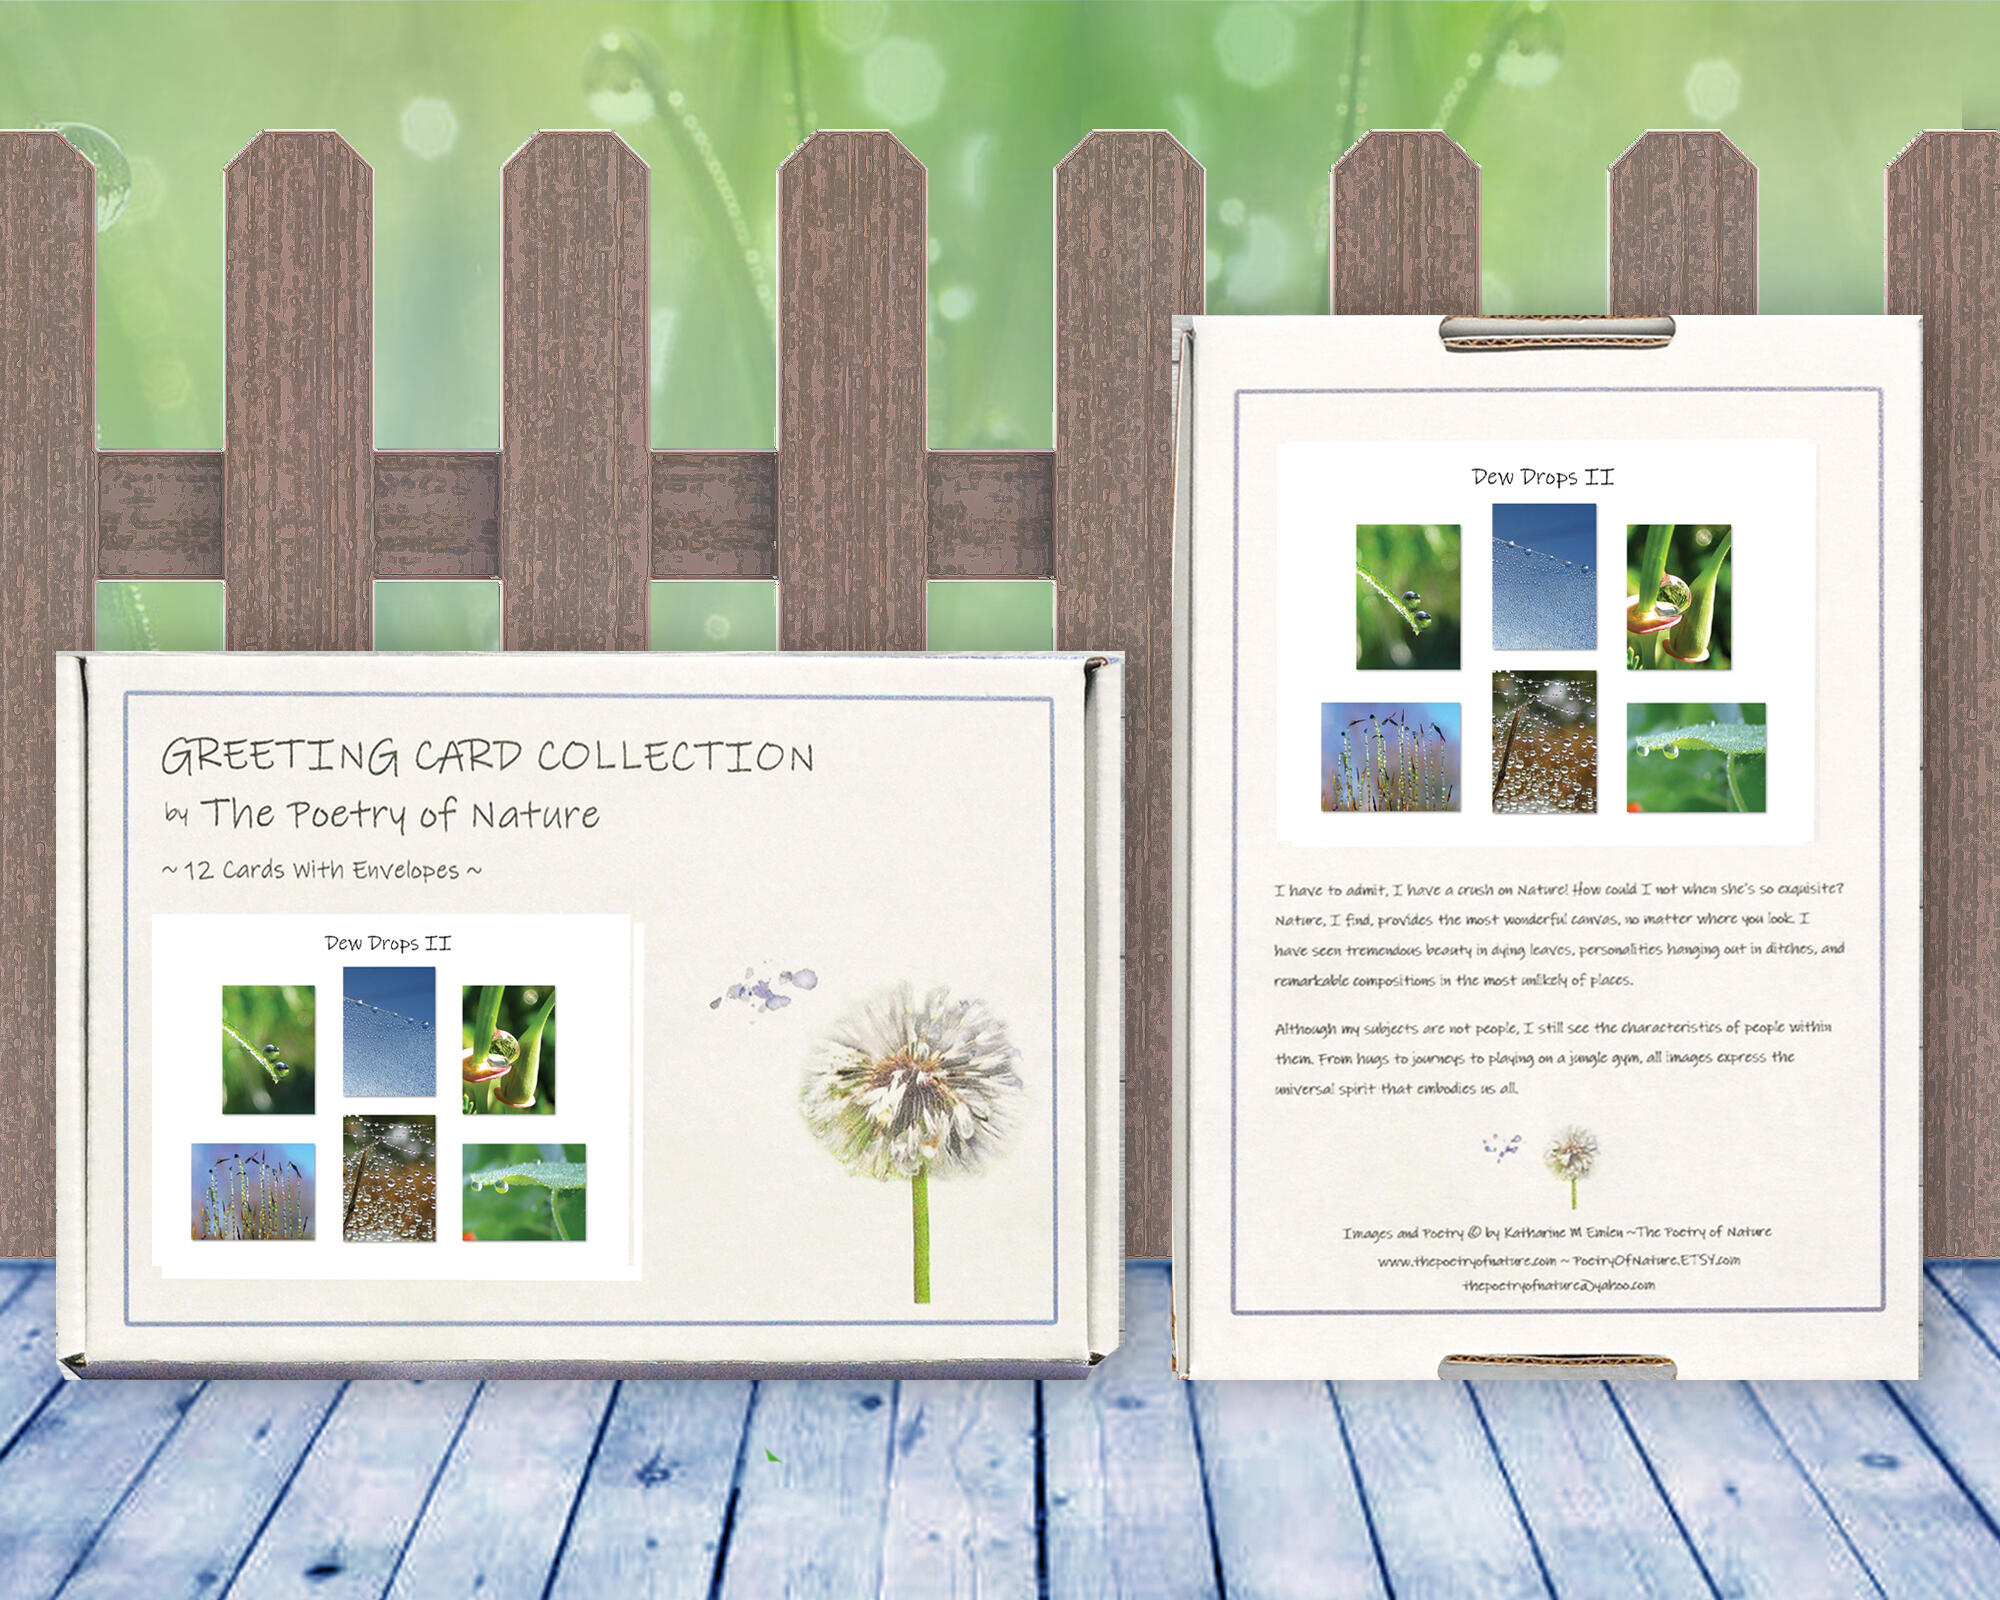 Dew Drops II - Greeting Card Collection by The Poetry of Nature